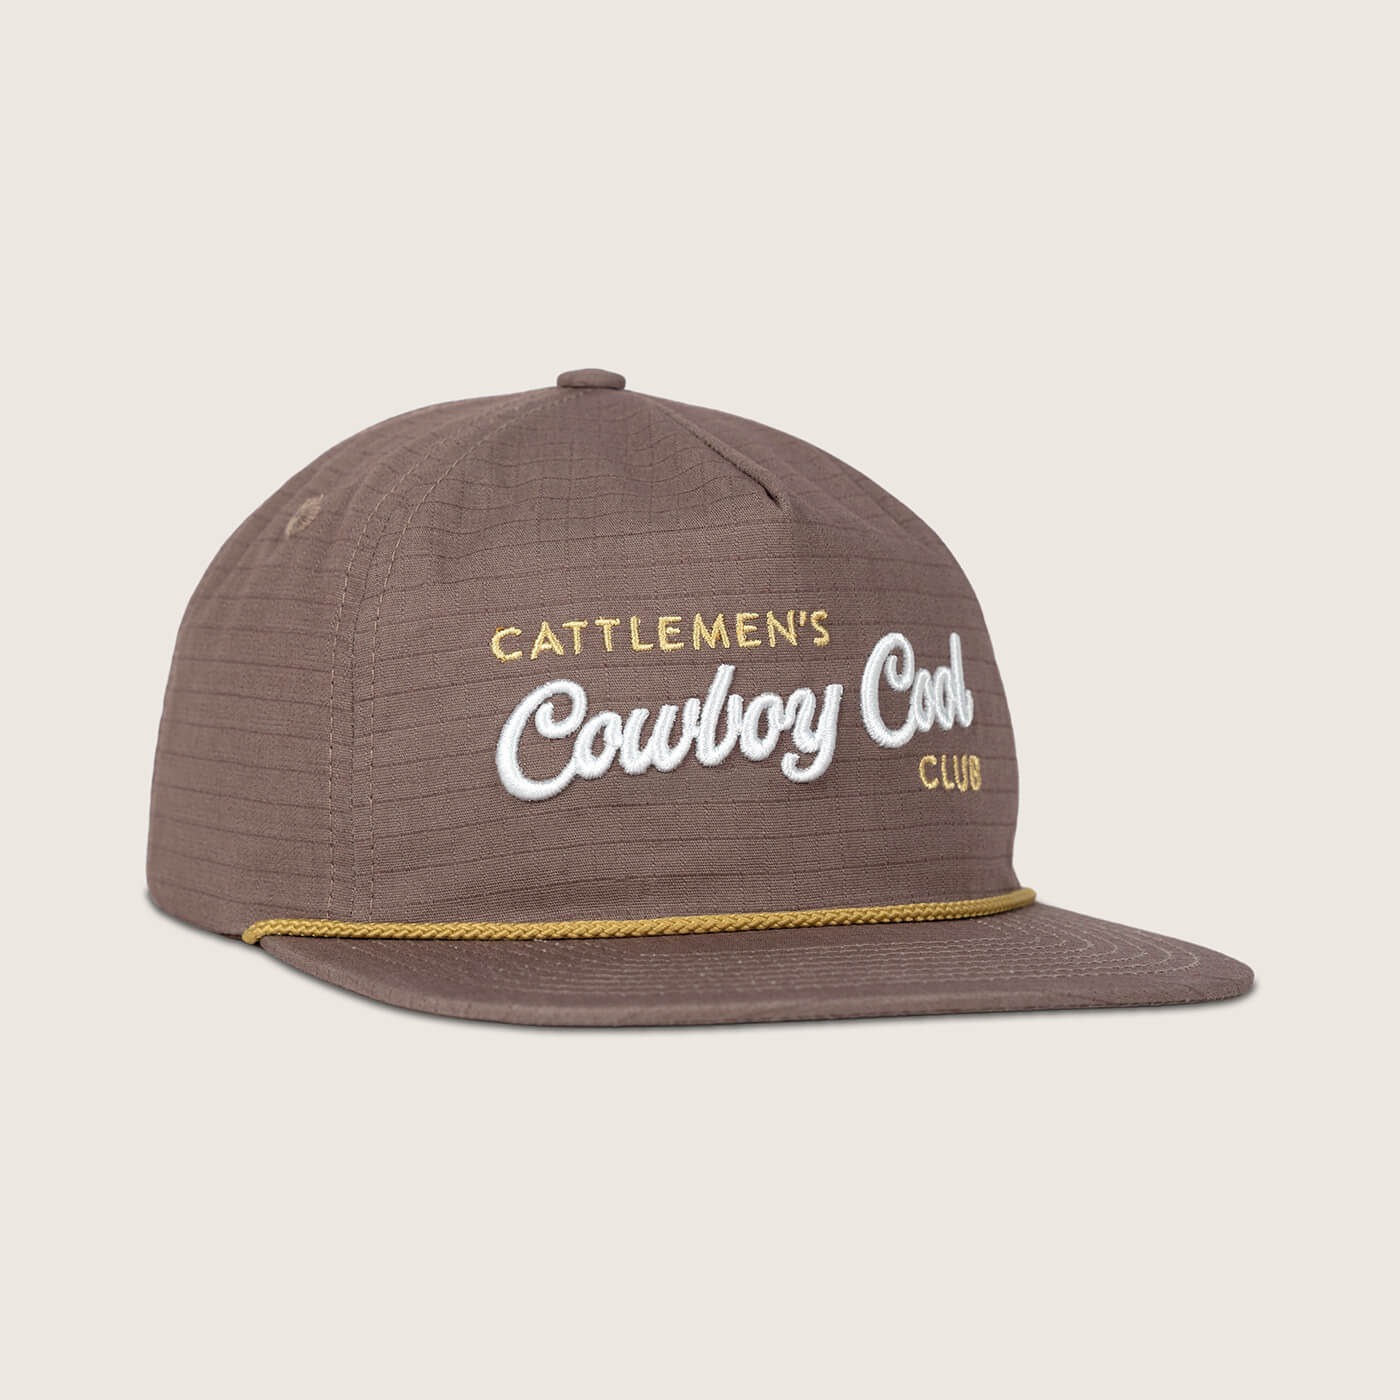 Cowboy Cool Cattlemans Club Pebble Cap Brown One Size Fits All